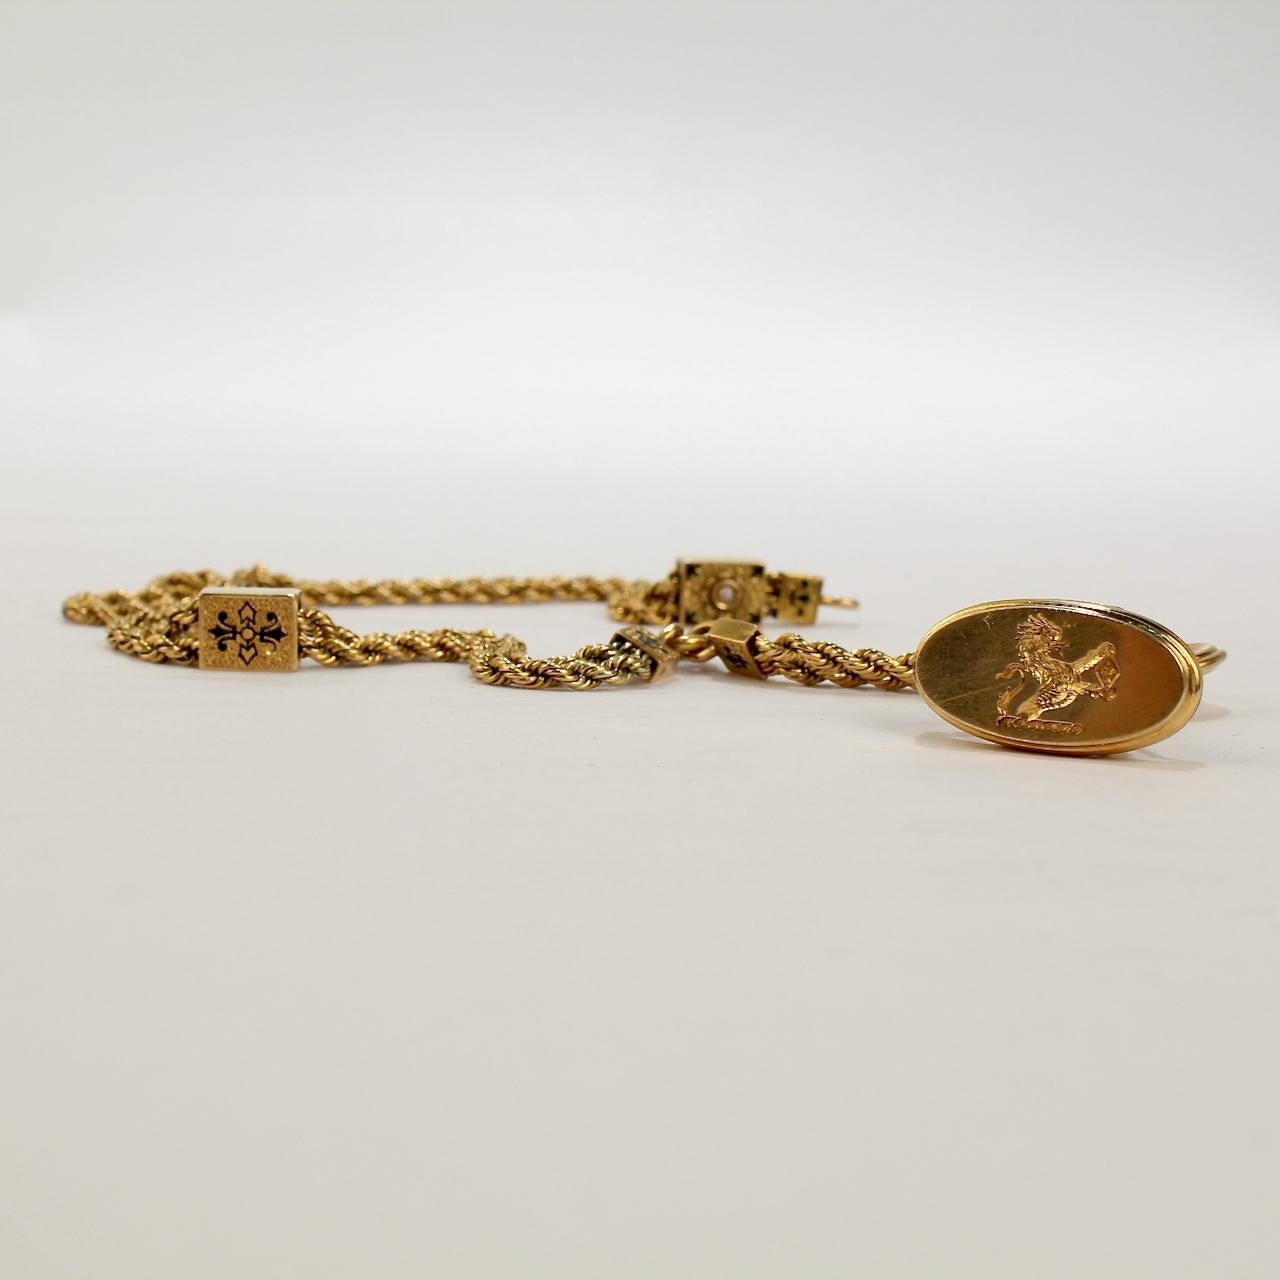 Antique Victorian Gold and Enamel Watch Chain with Slides and a Fob Seal For Sale 6